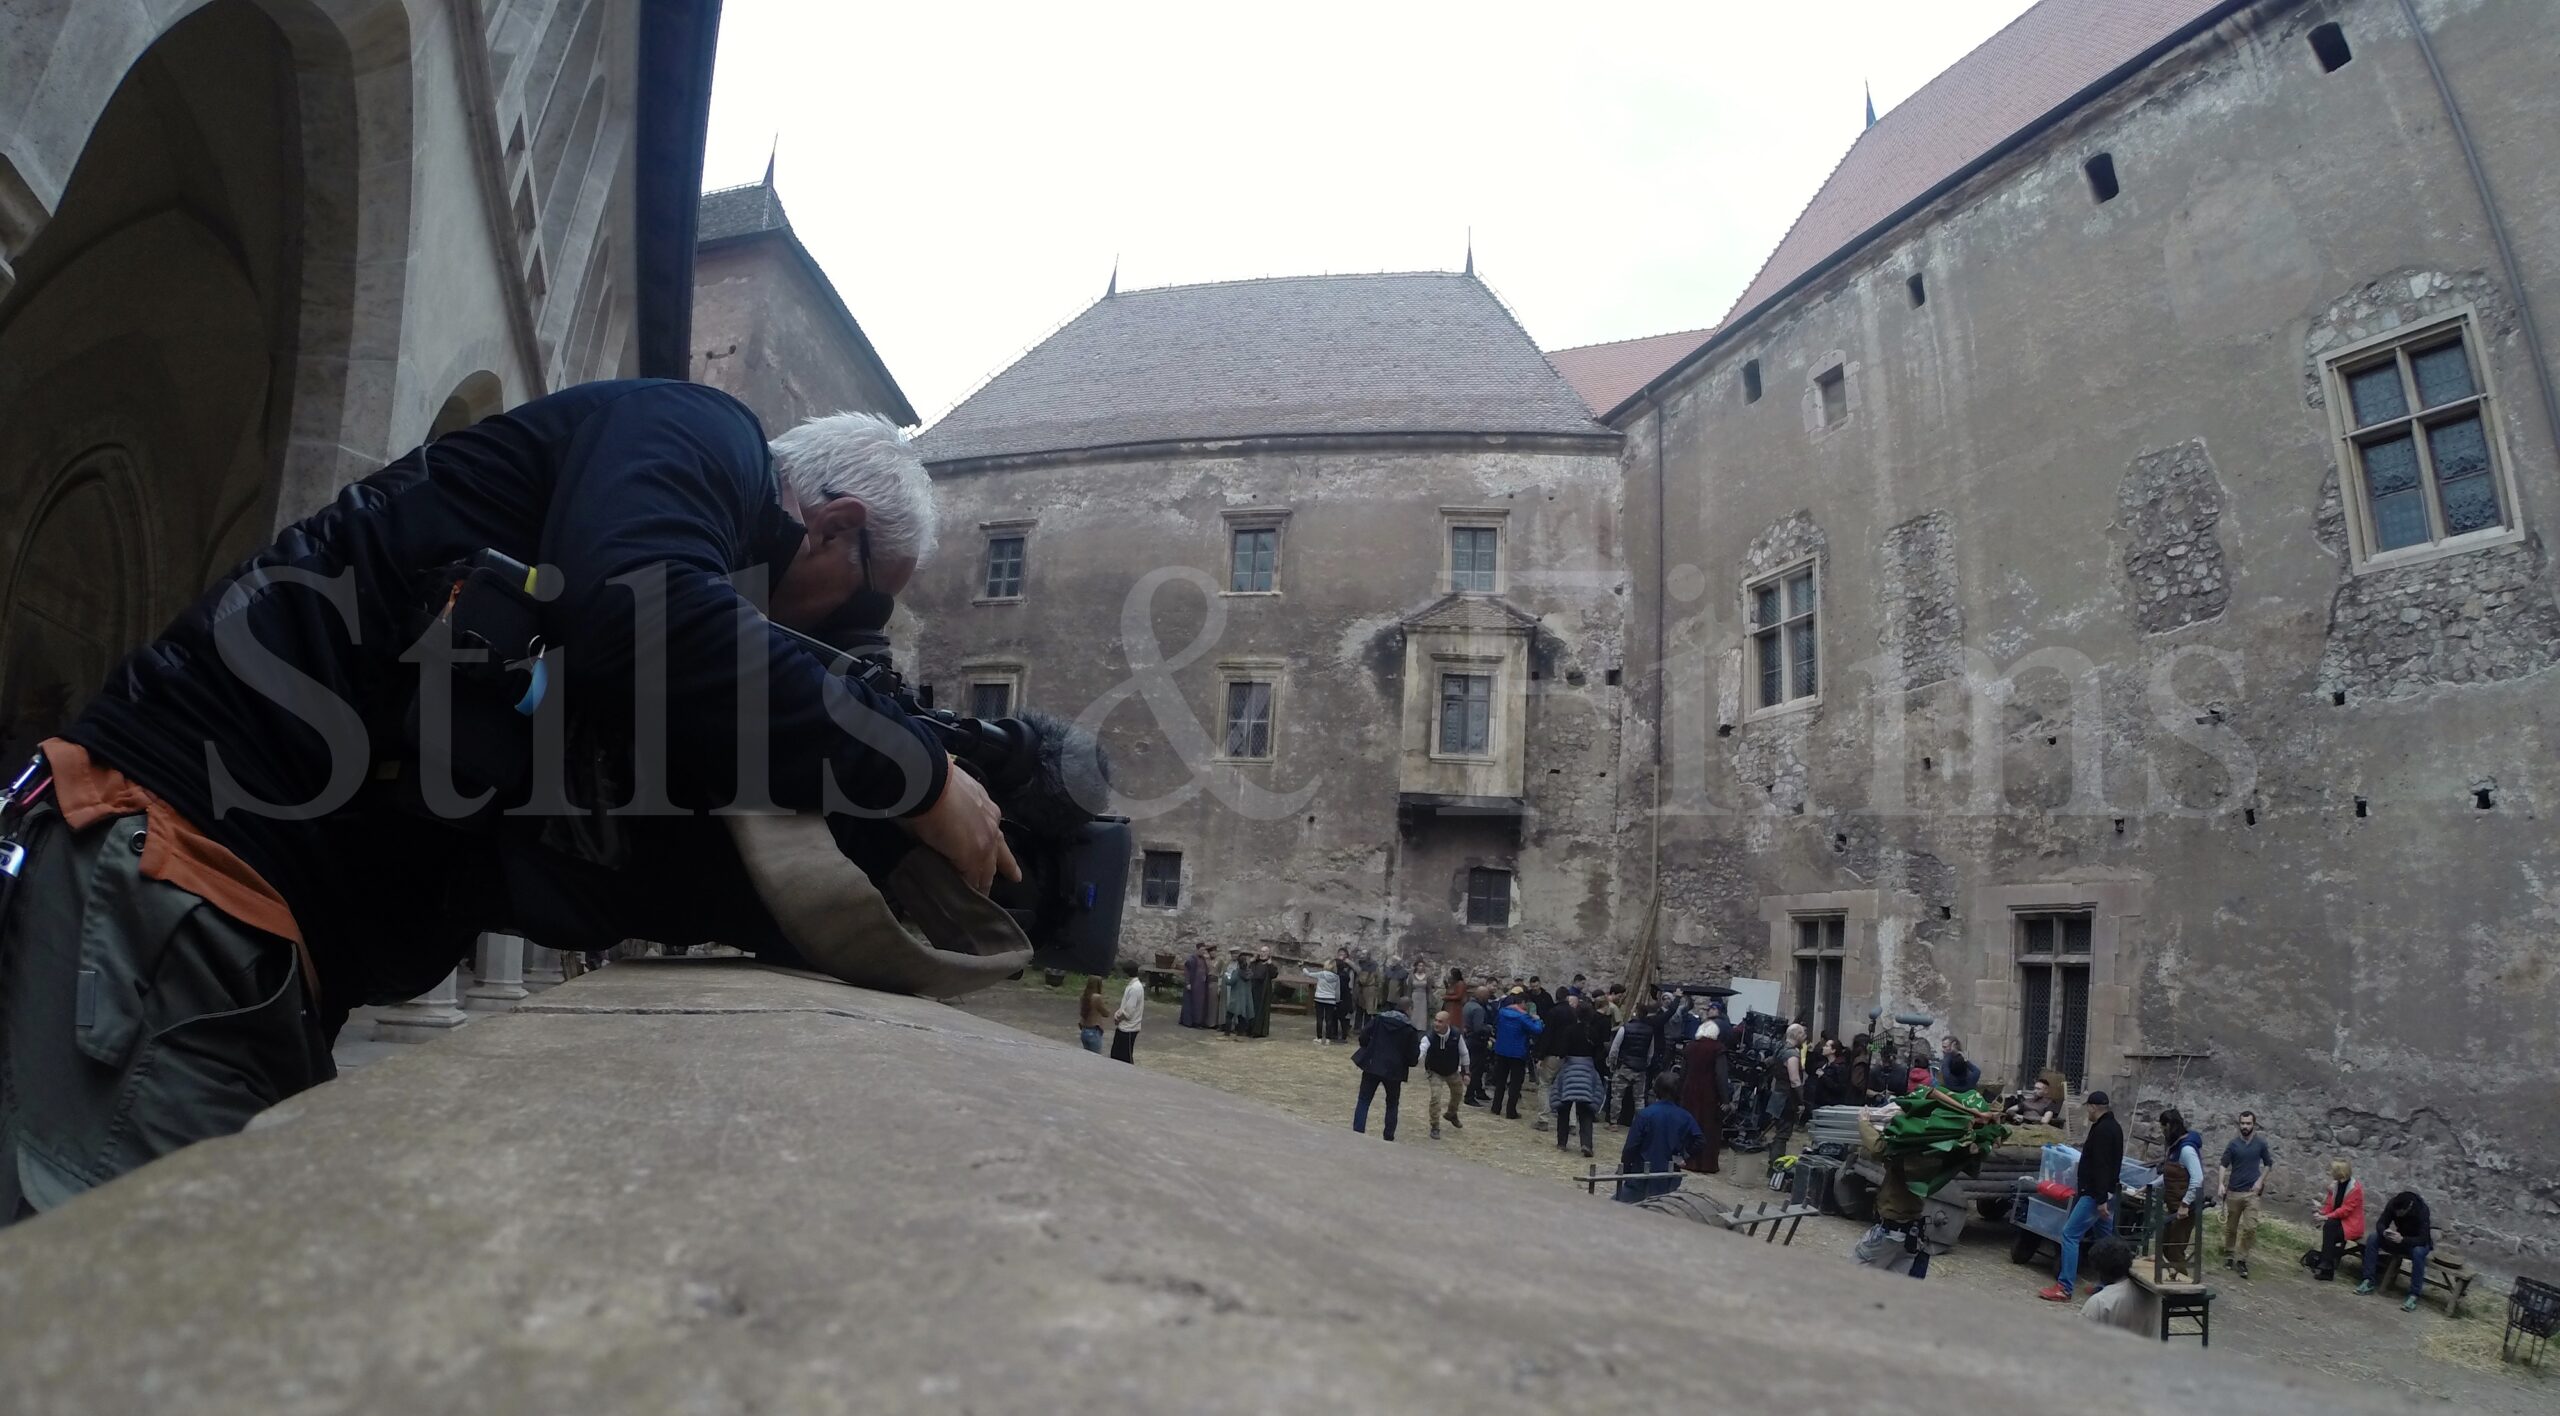 Camera crew from Bucharest films behind the scenes at the Hunedoara Castle in Romania